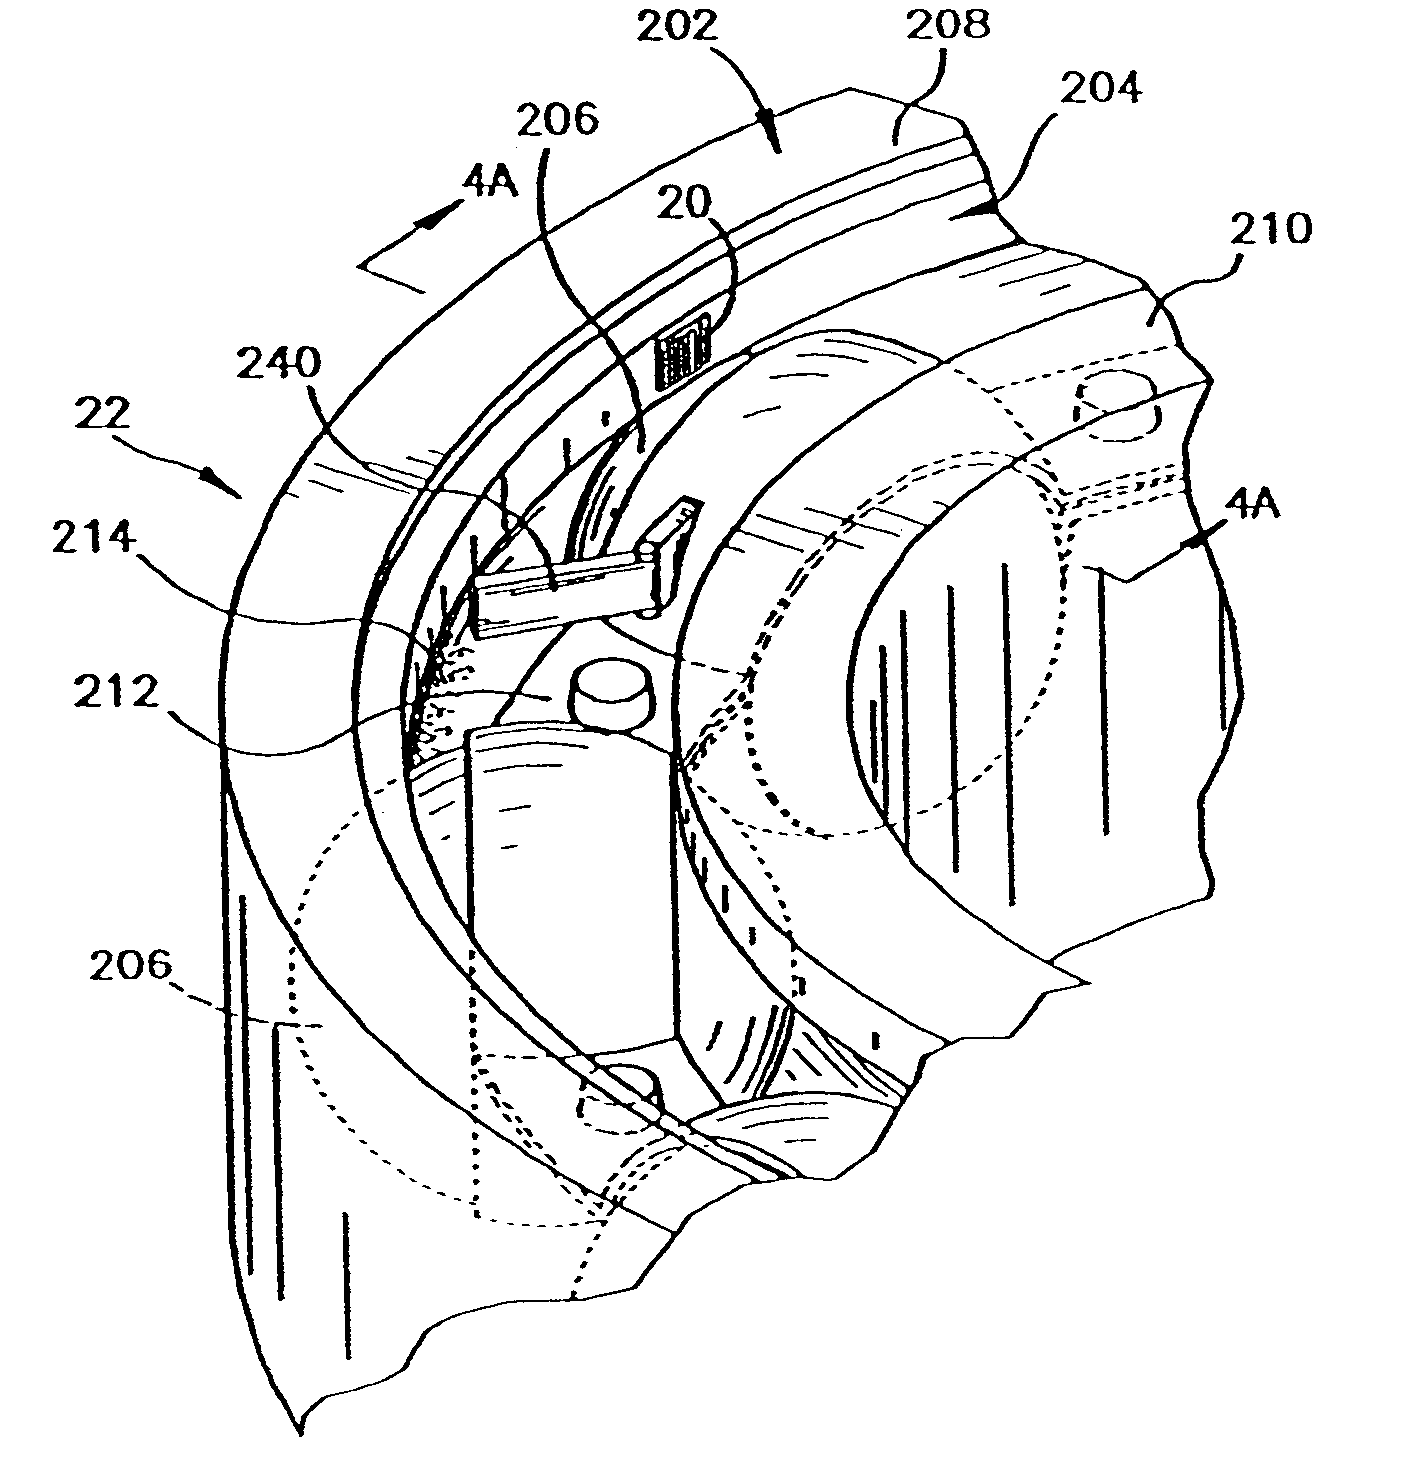 System and method for dynamic lubrication adjustment for a lubrication analysis system